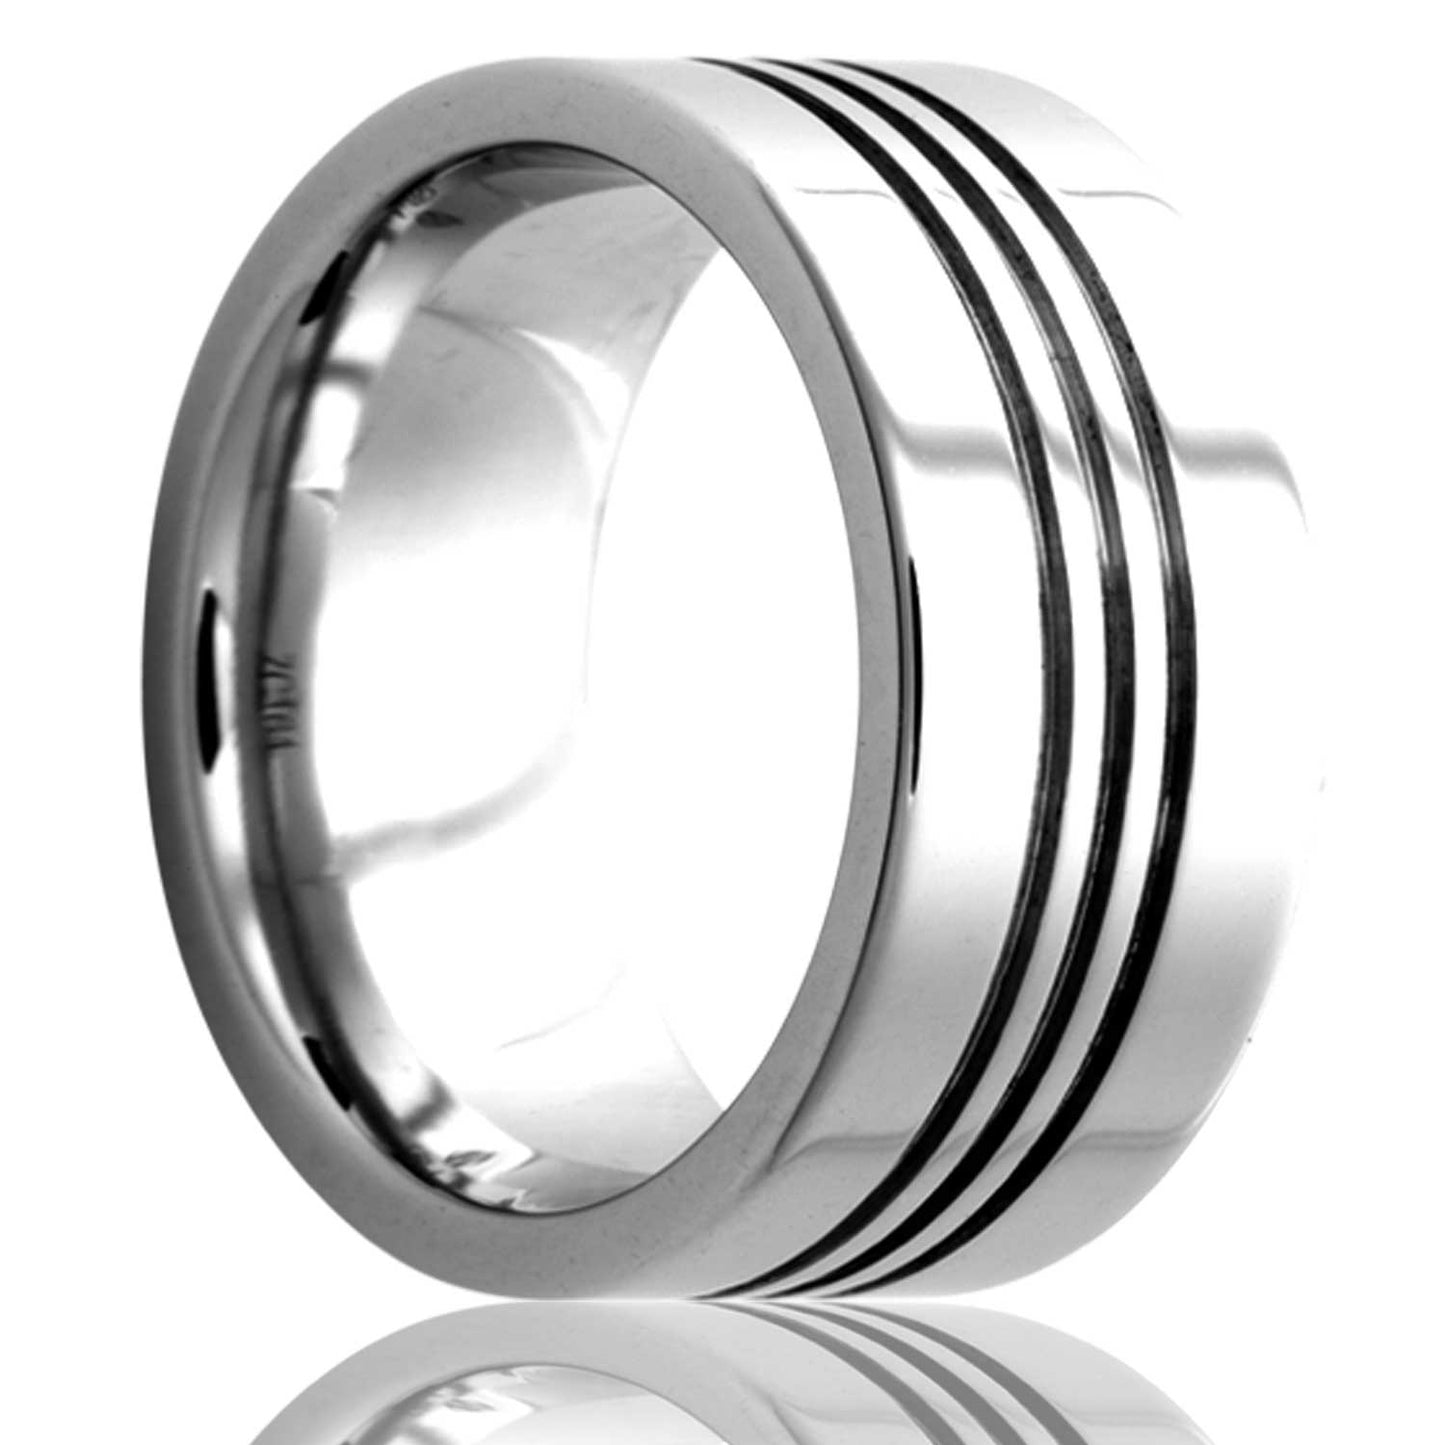 A triple center grooved cobalt wedding band displayed on a neutral white background.